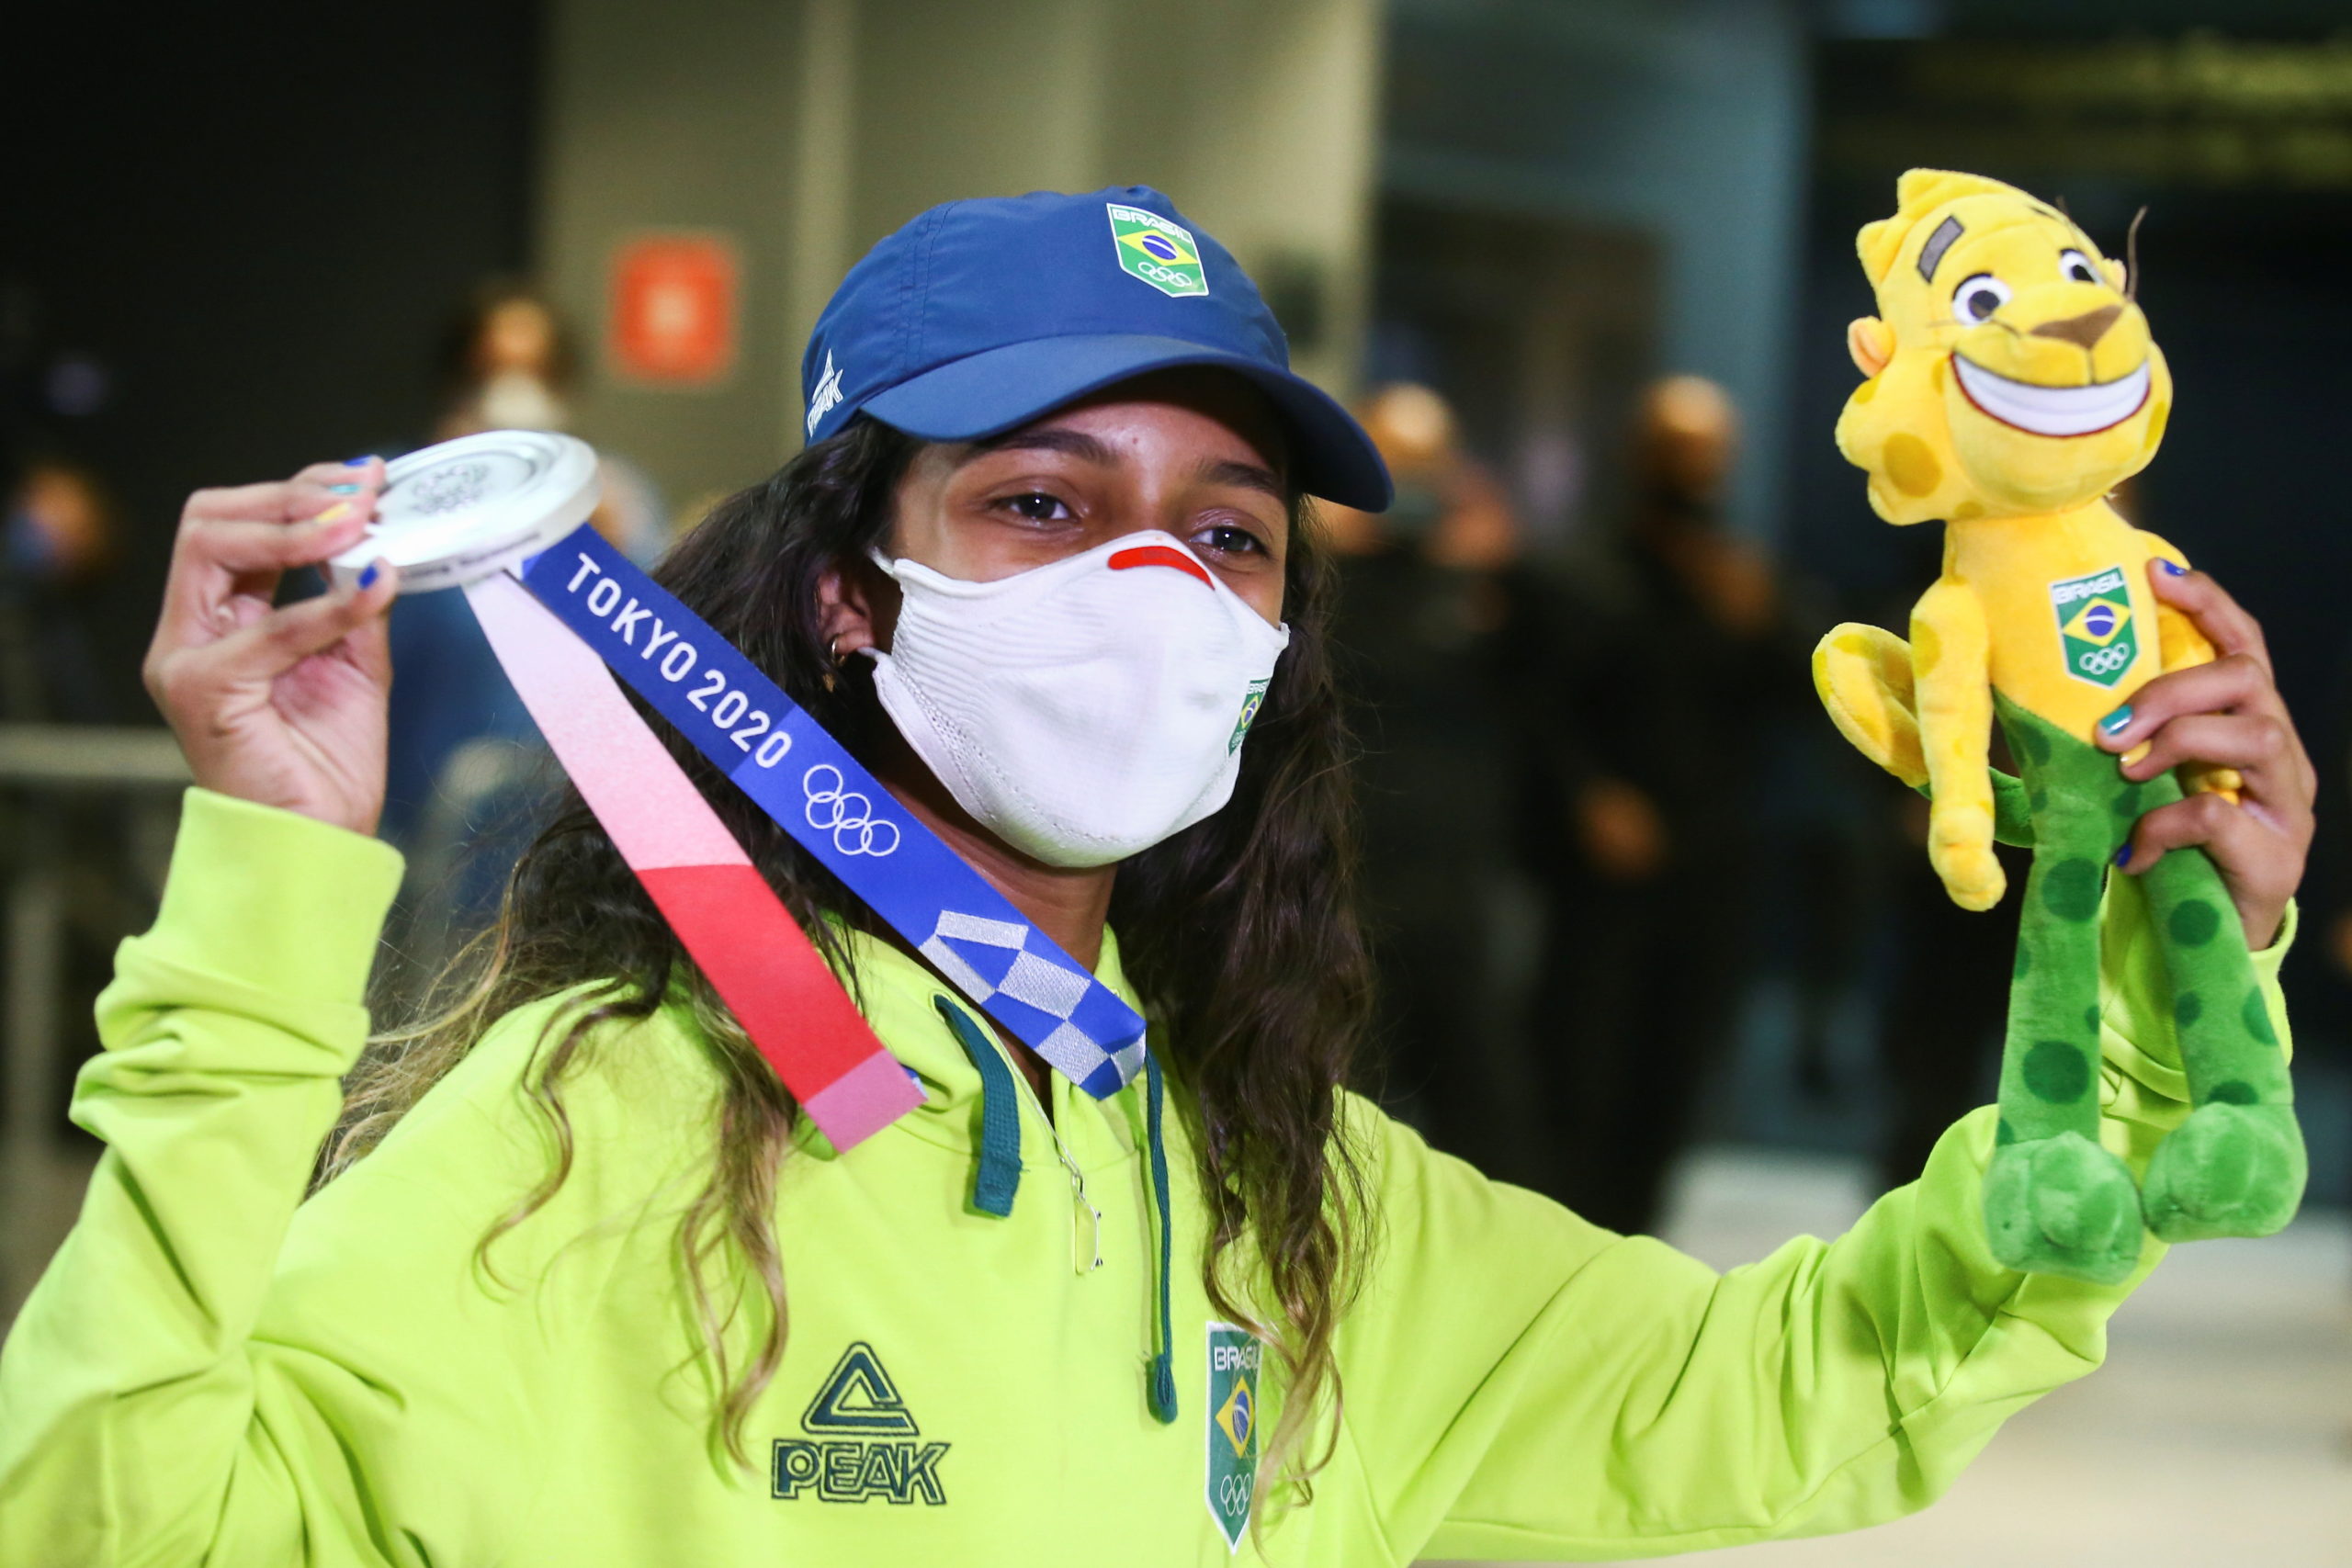 Brazilian skateboarder Rayssa Leal who won the silver medal at Tokyo 2020 Olympics, arrives at the Guarulhos International Airport, near Sao Paulo, Brazil, July 28, 2021